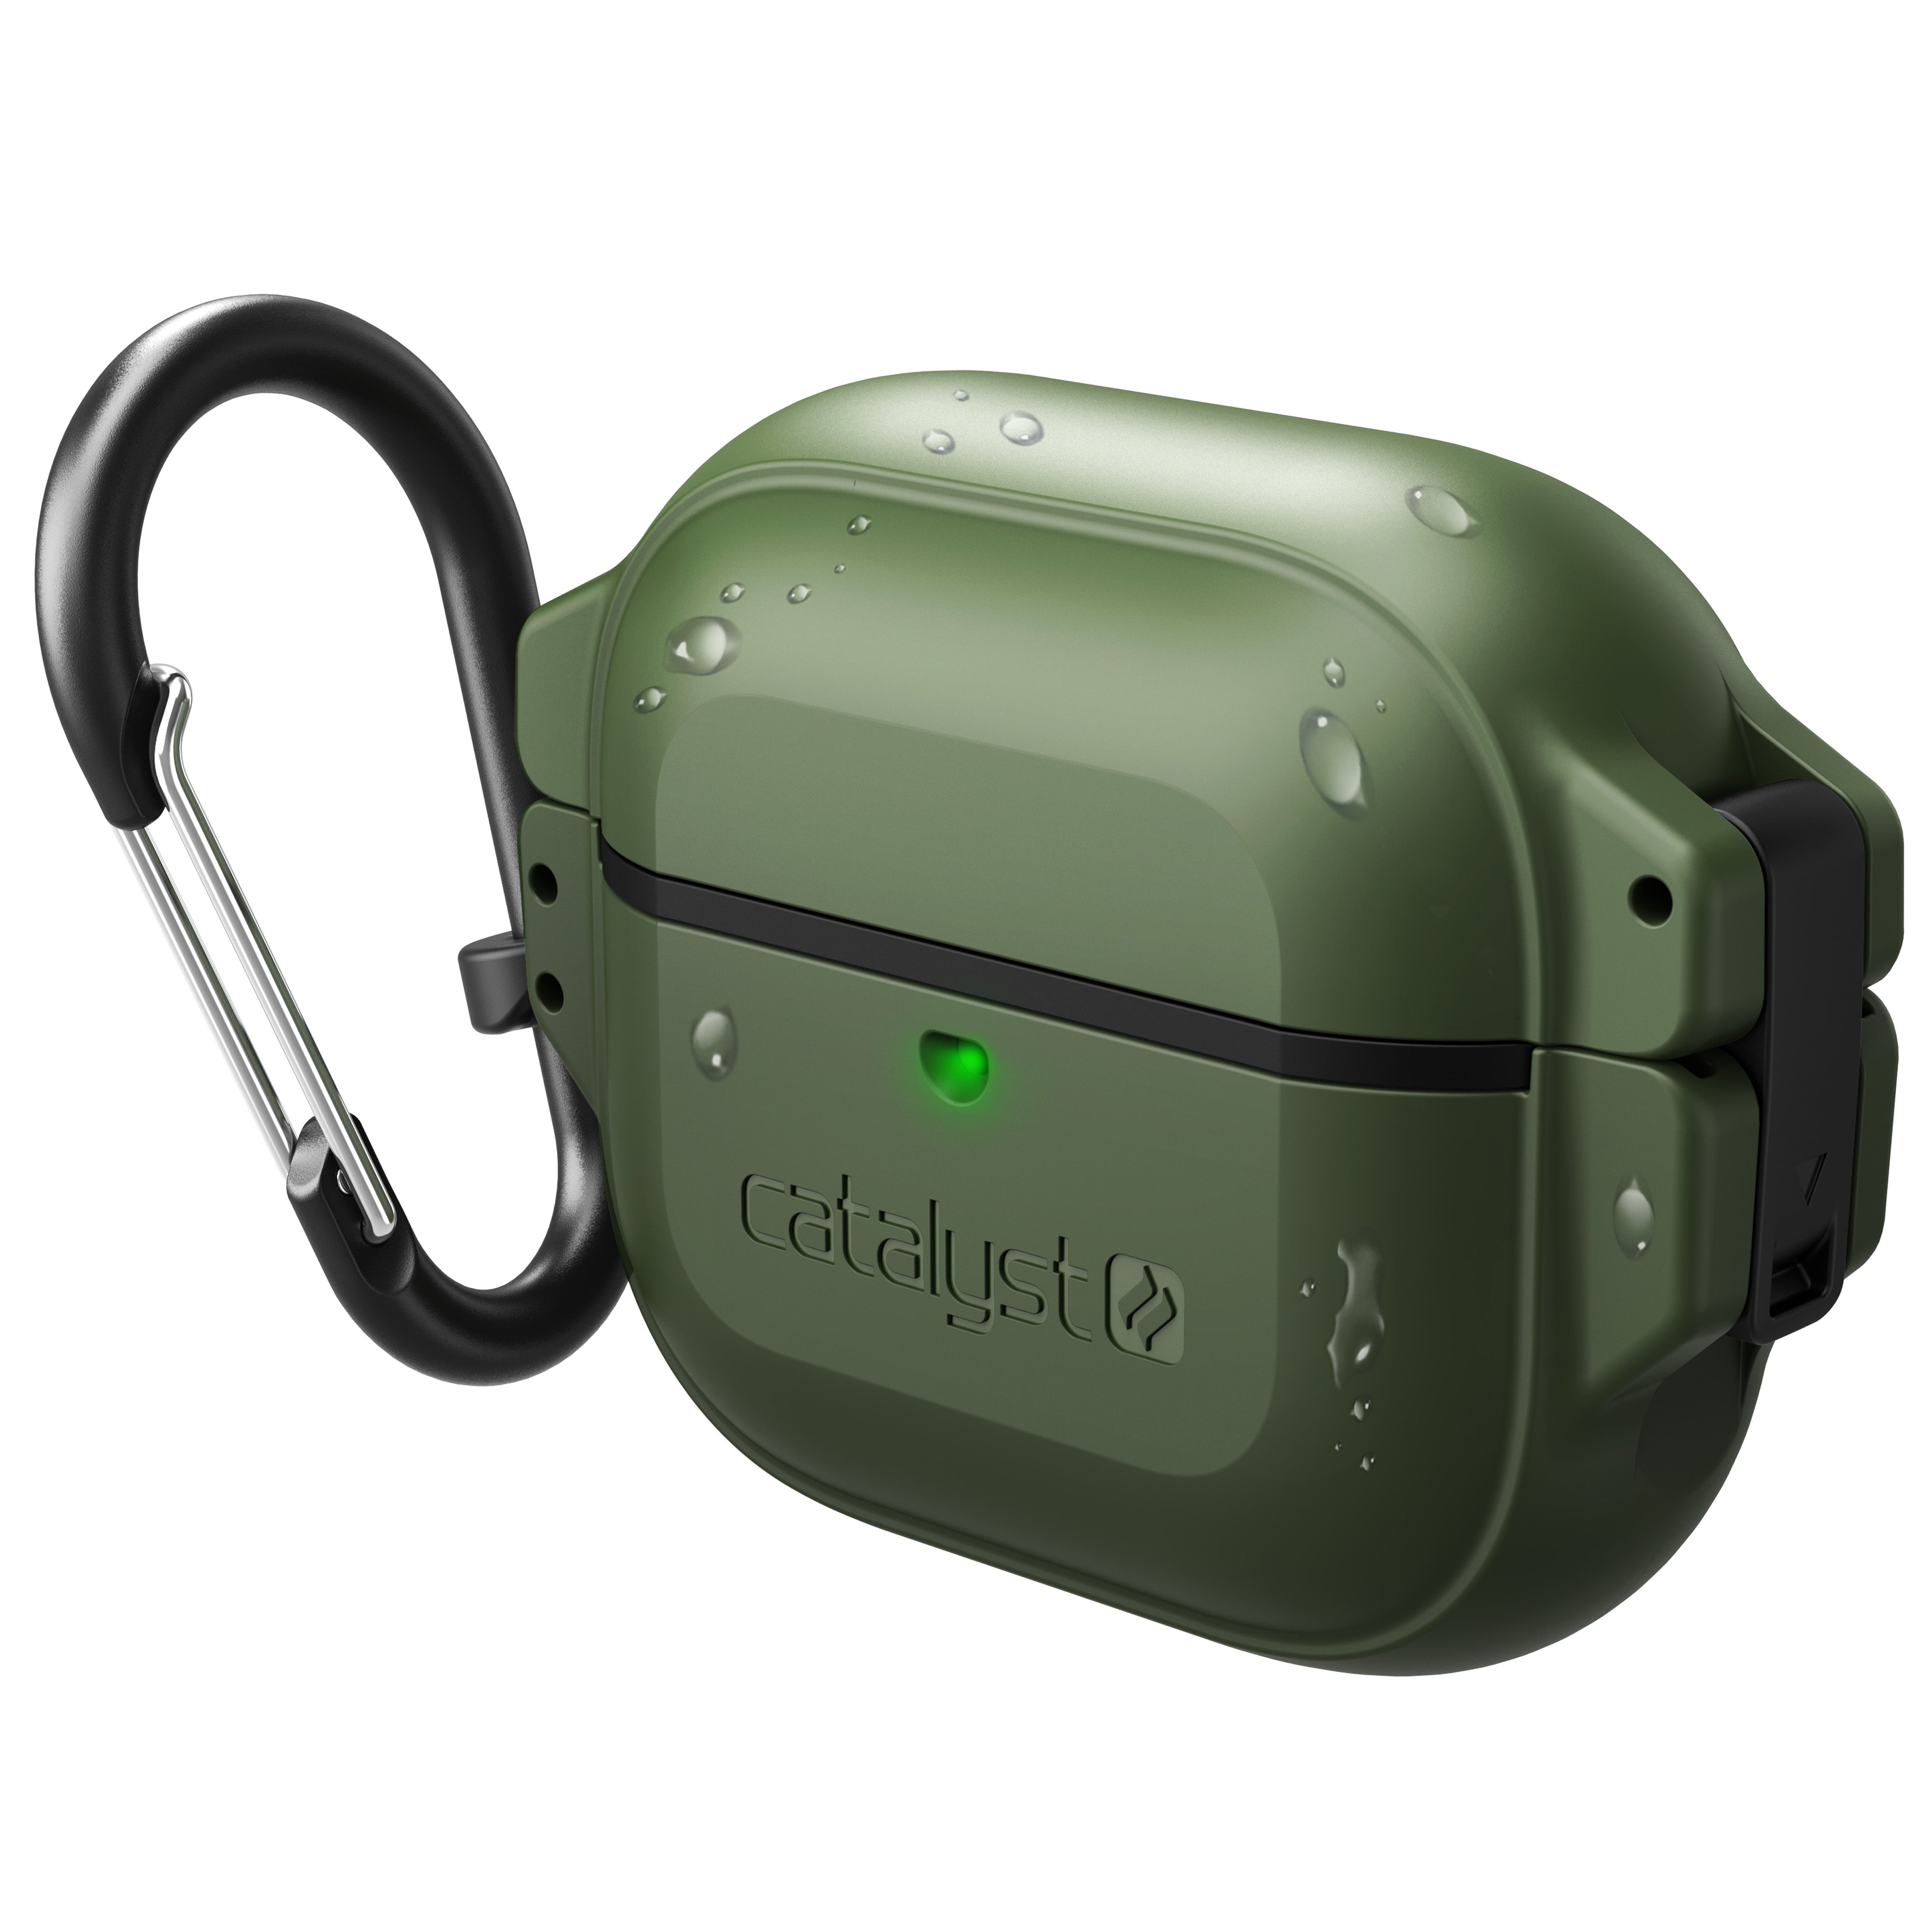 Catalyst airpds gen 3 100m waterproof total protection case+ carabiner showing the front view of the case in army green colorway